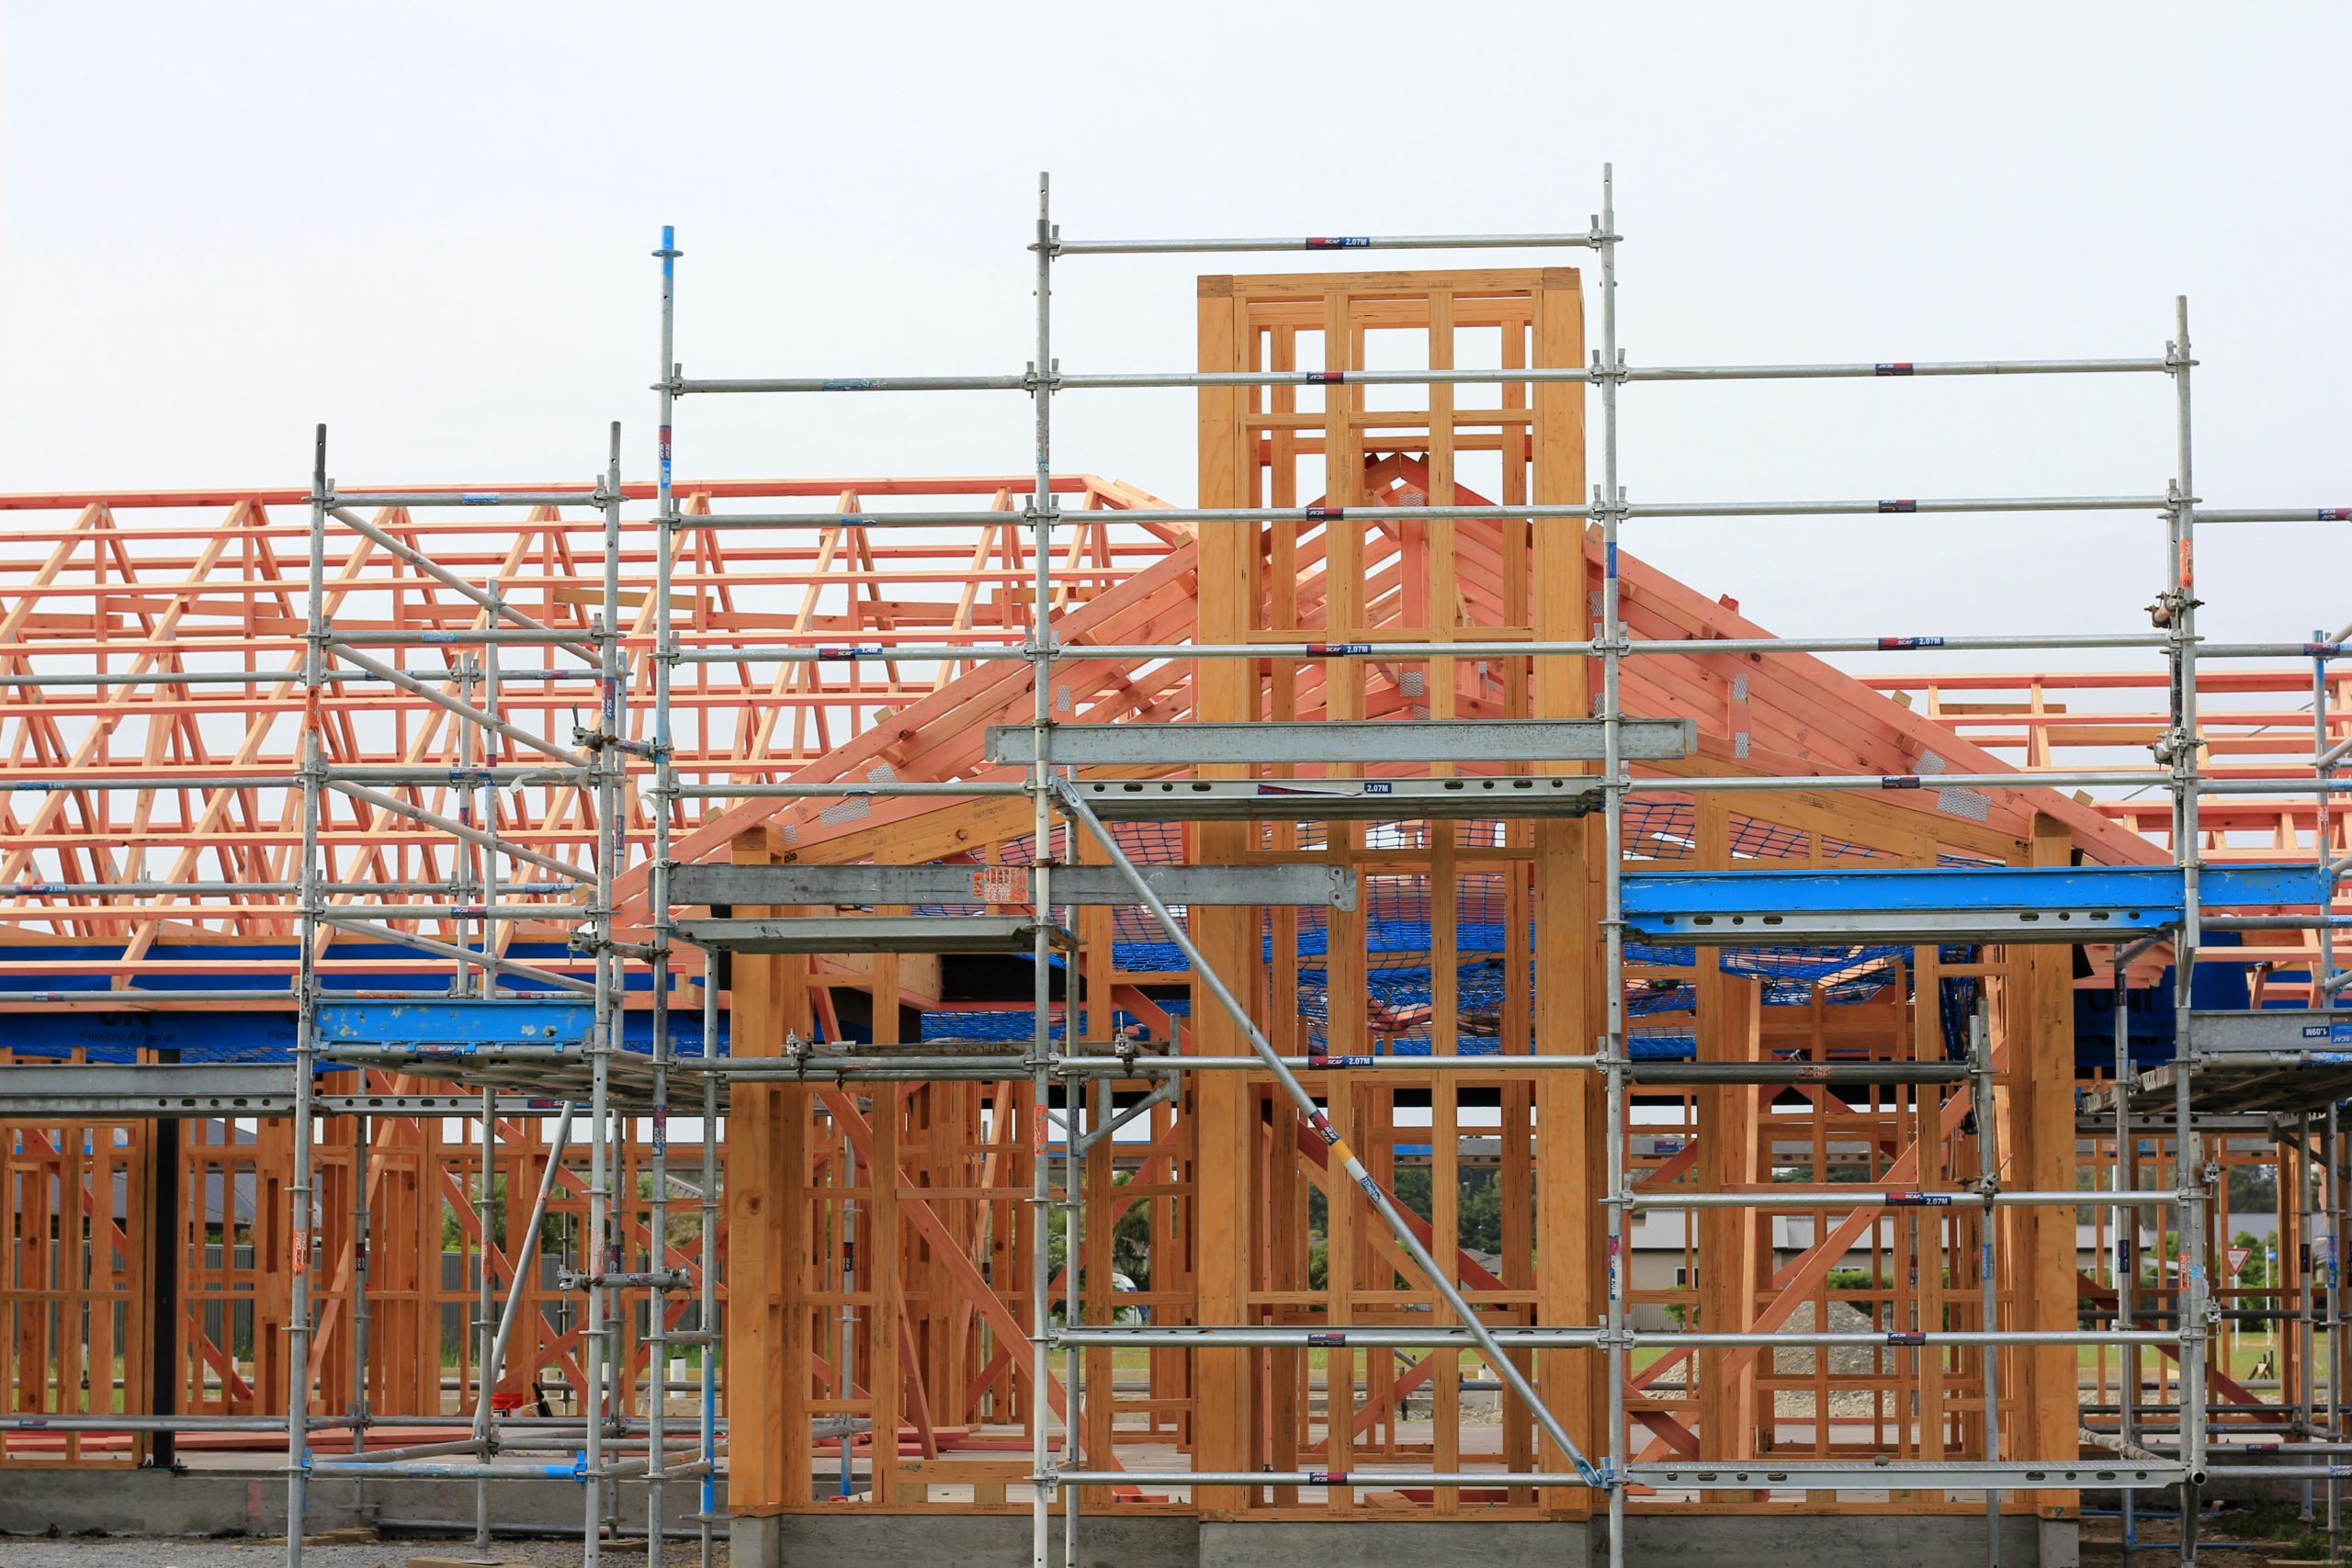 Hank Zarihs Associates | Housing survey reveals planning permissions at an all-time low